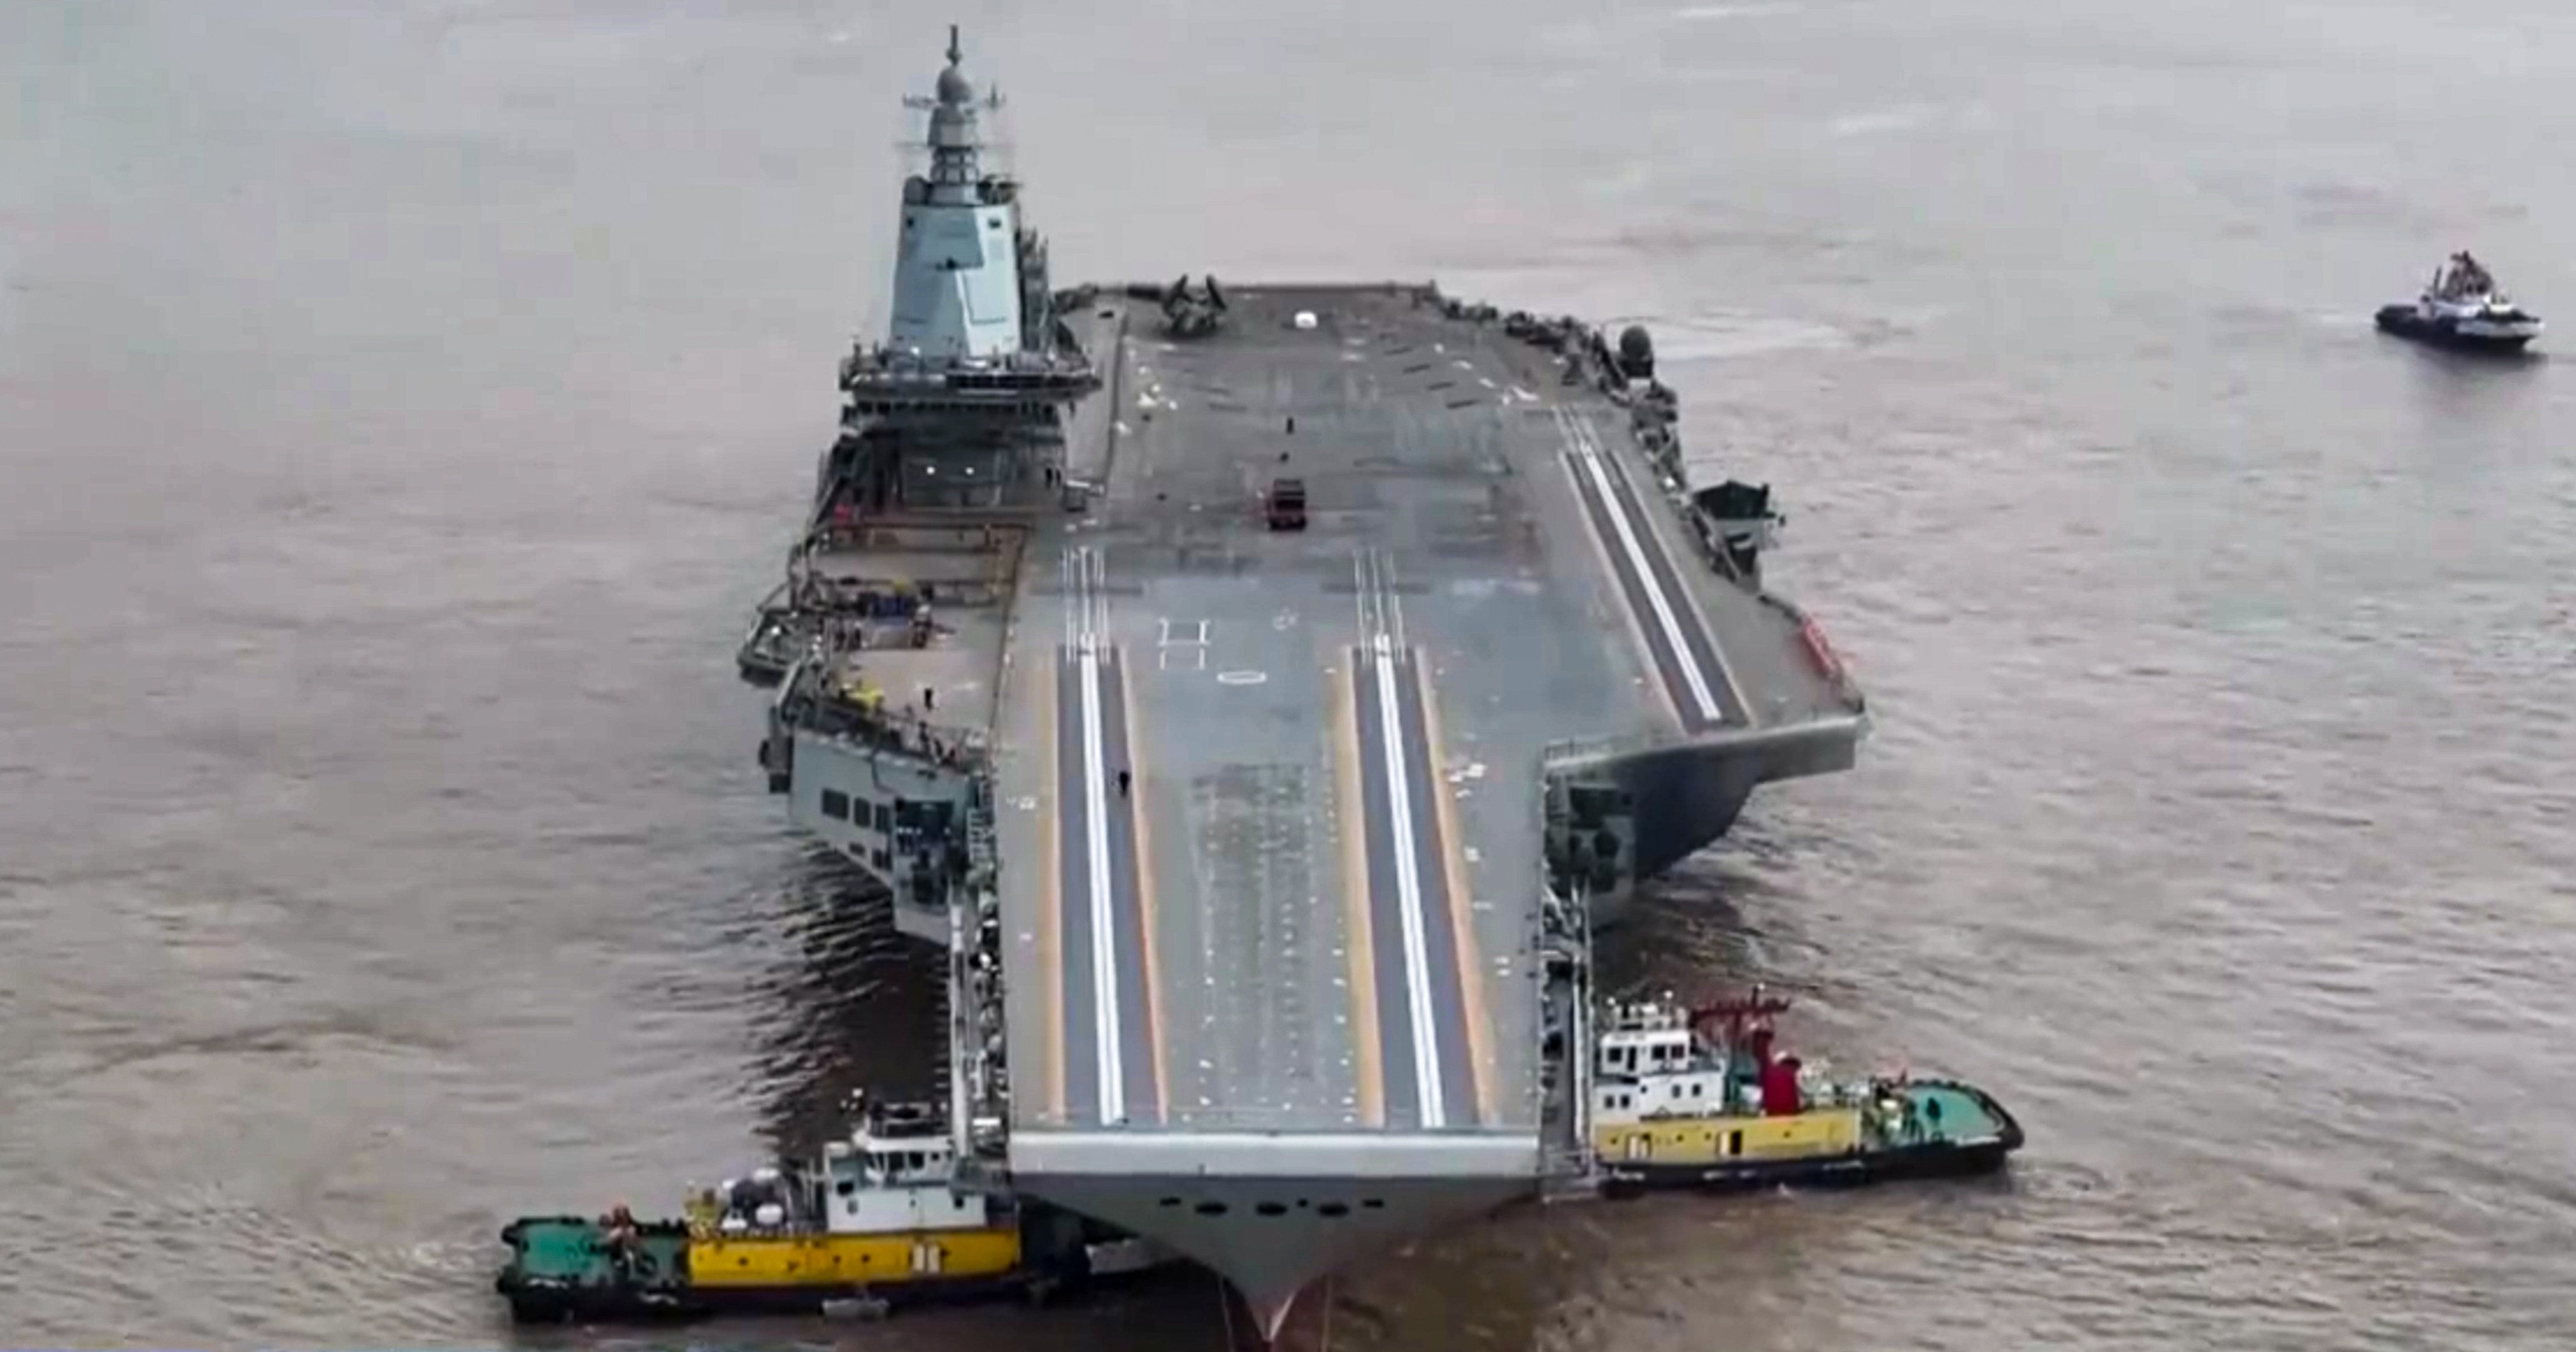 CCTV shows footage of the aircraft carrier Fujian being manoeuvred by tugboats. Photo: CCTV